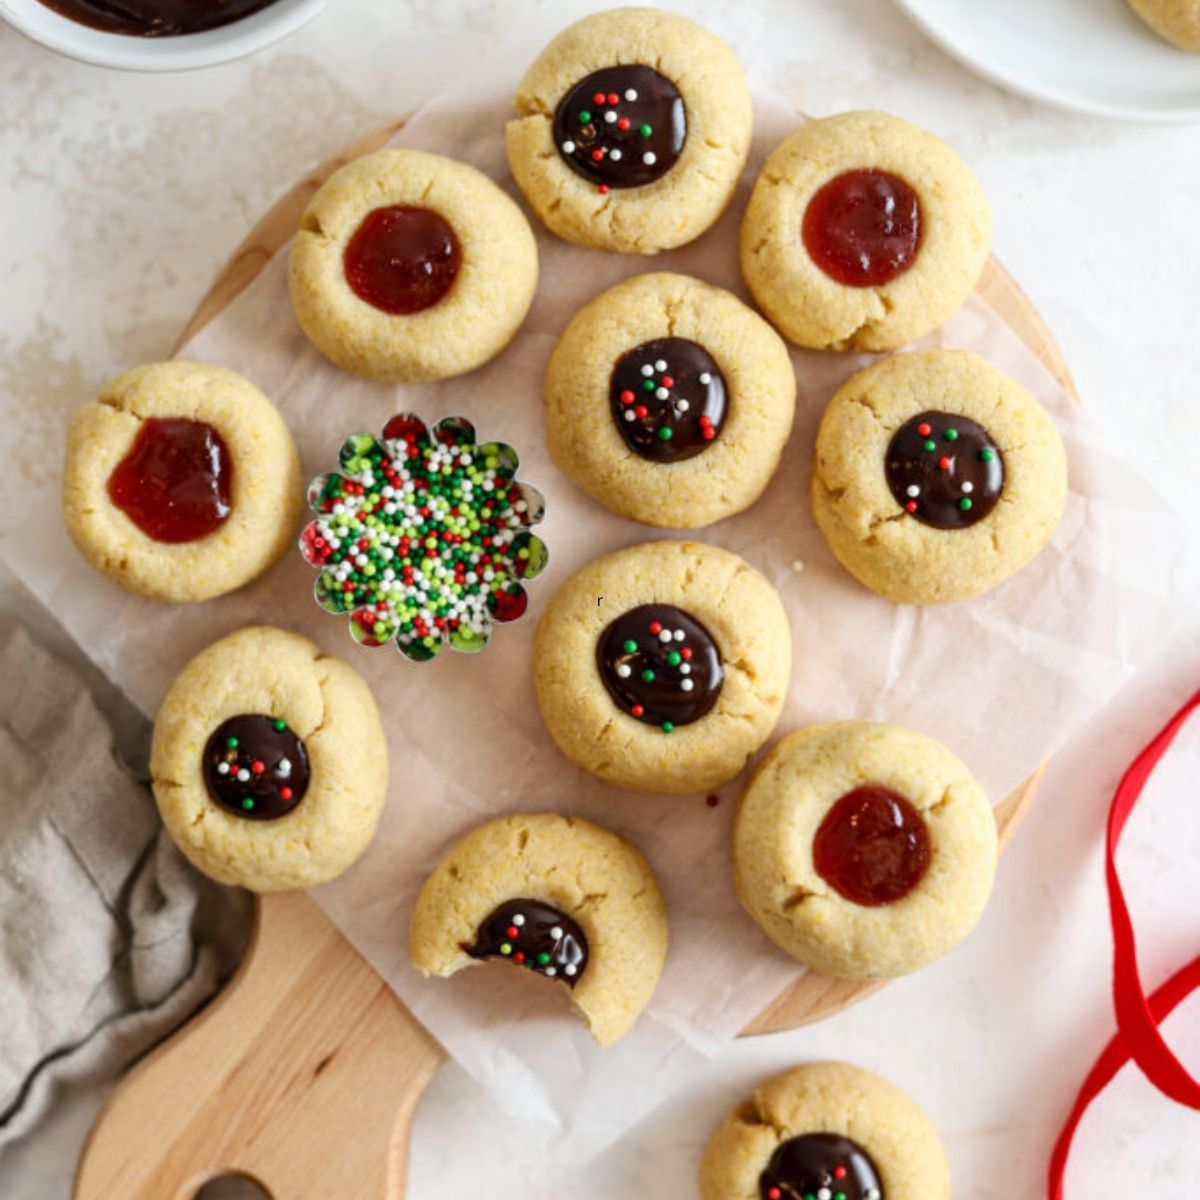 Thumbprint cookies filled with jam and chocolate and a bowl of sprinkles.